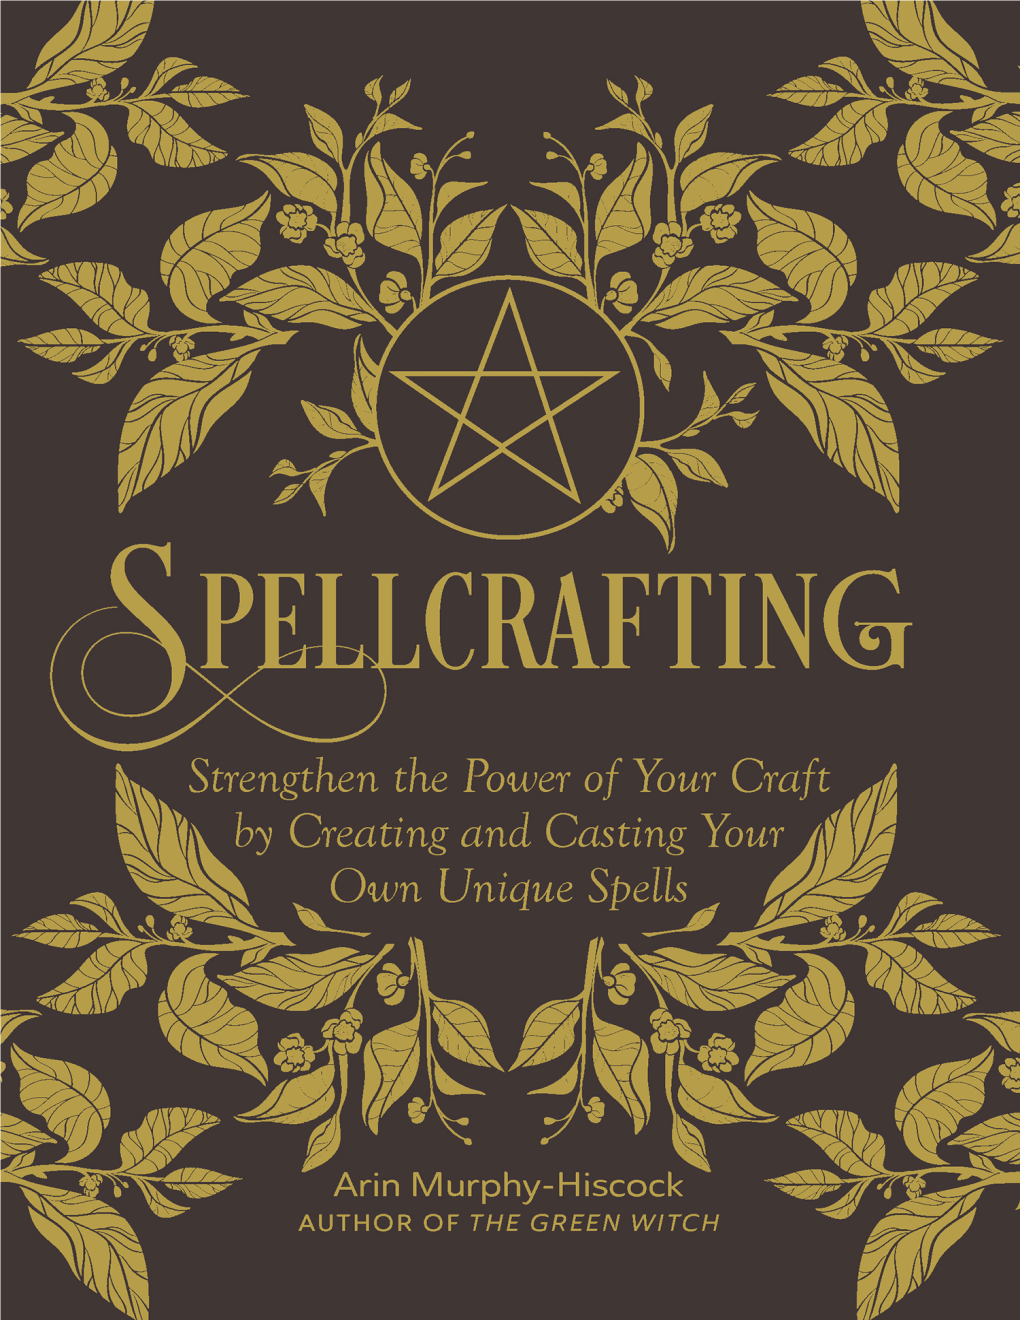 Spellcrafting Will Help You Do All of This and More